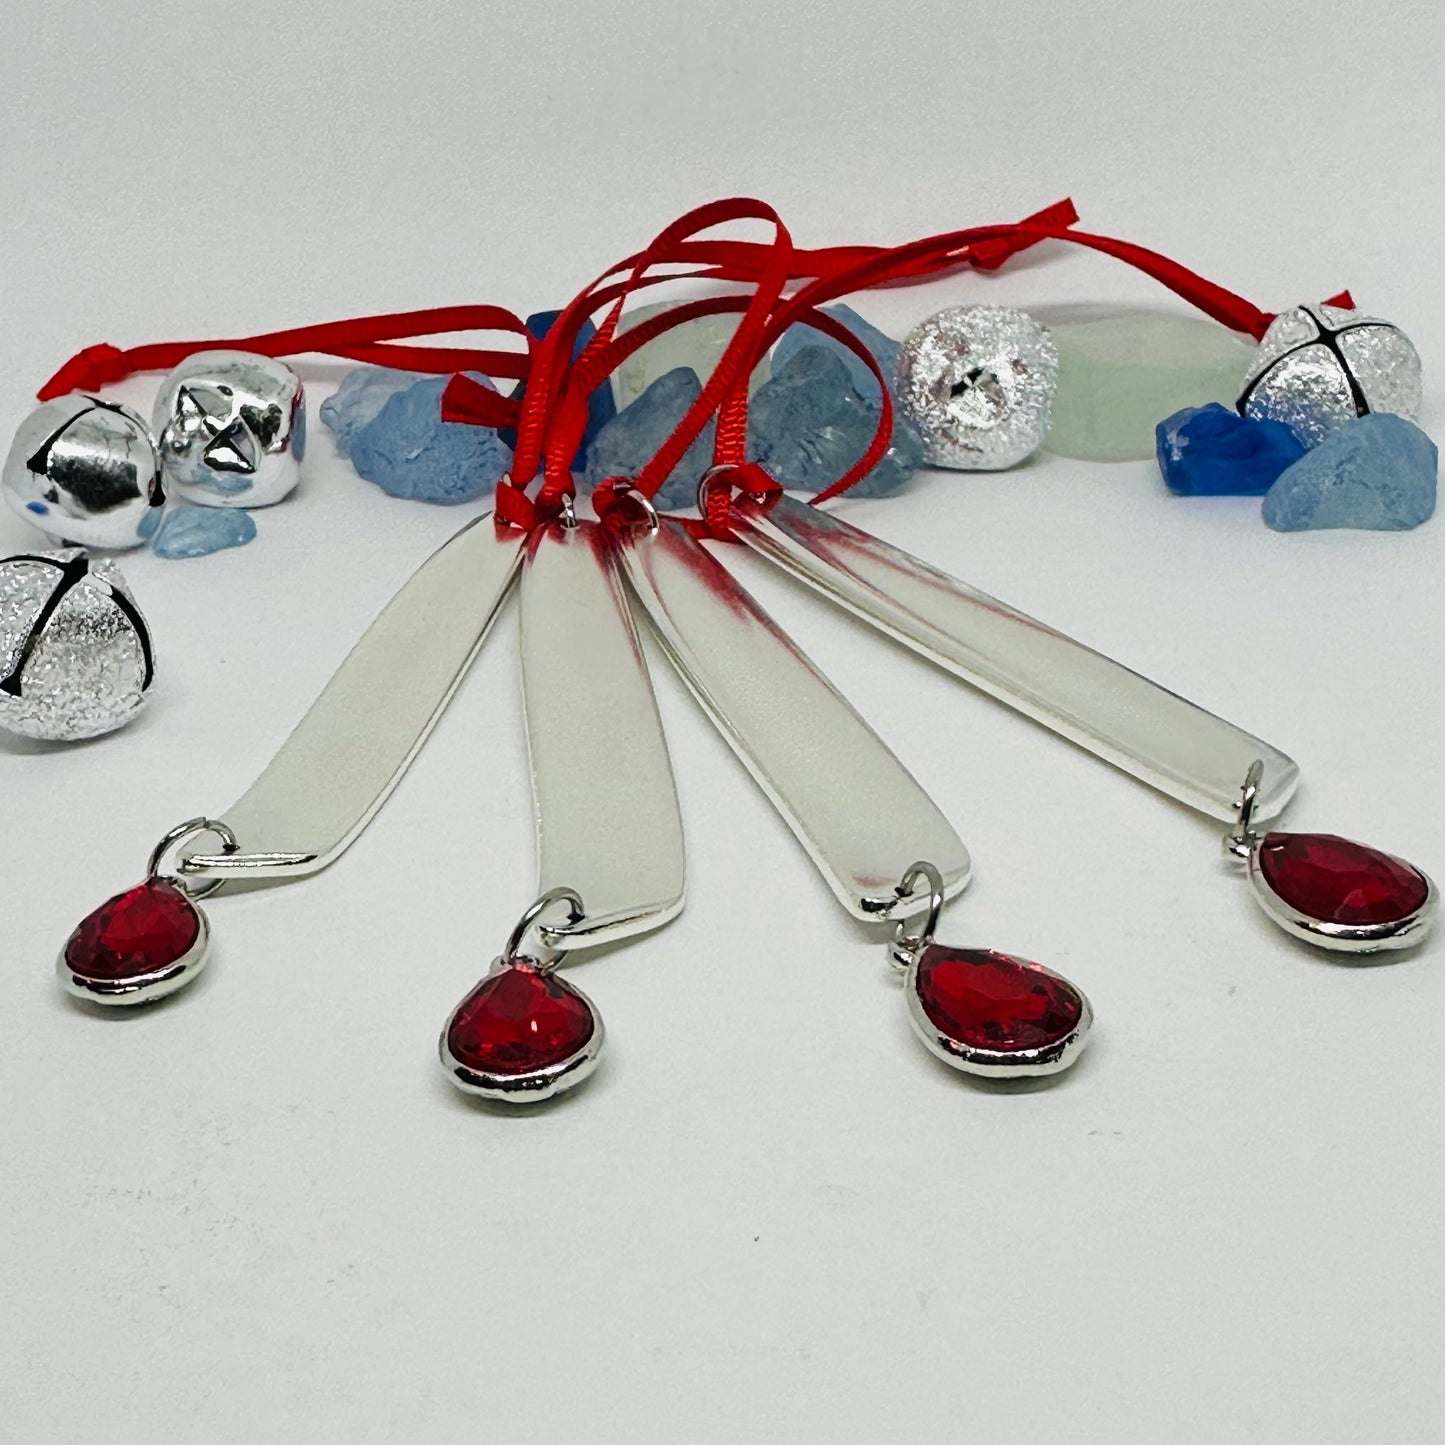 Vintage South Seas 1955 Icicle Ornaments with Red Teardrop Charms | Limited Edition Holiday Decor | Window Charm | Garnet Ruby